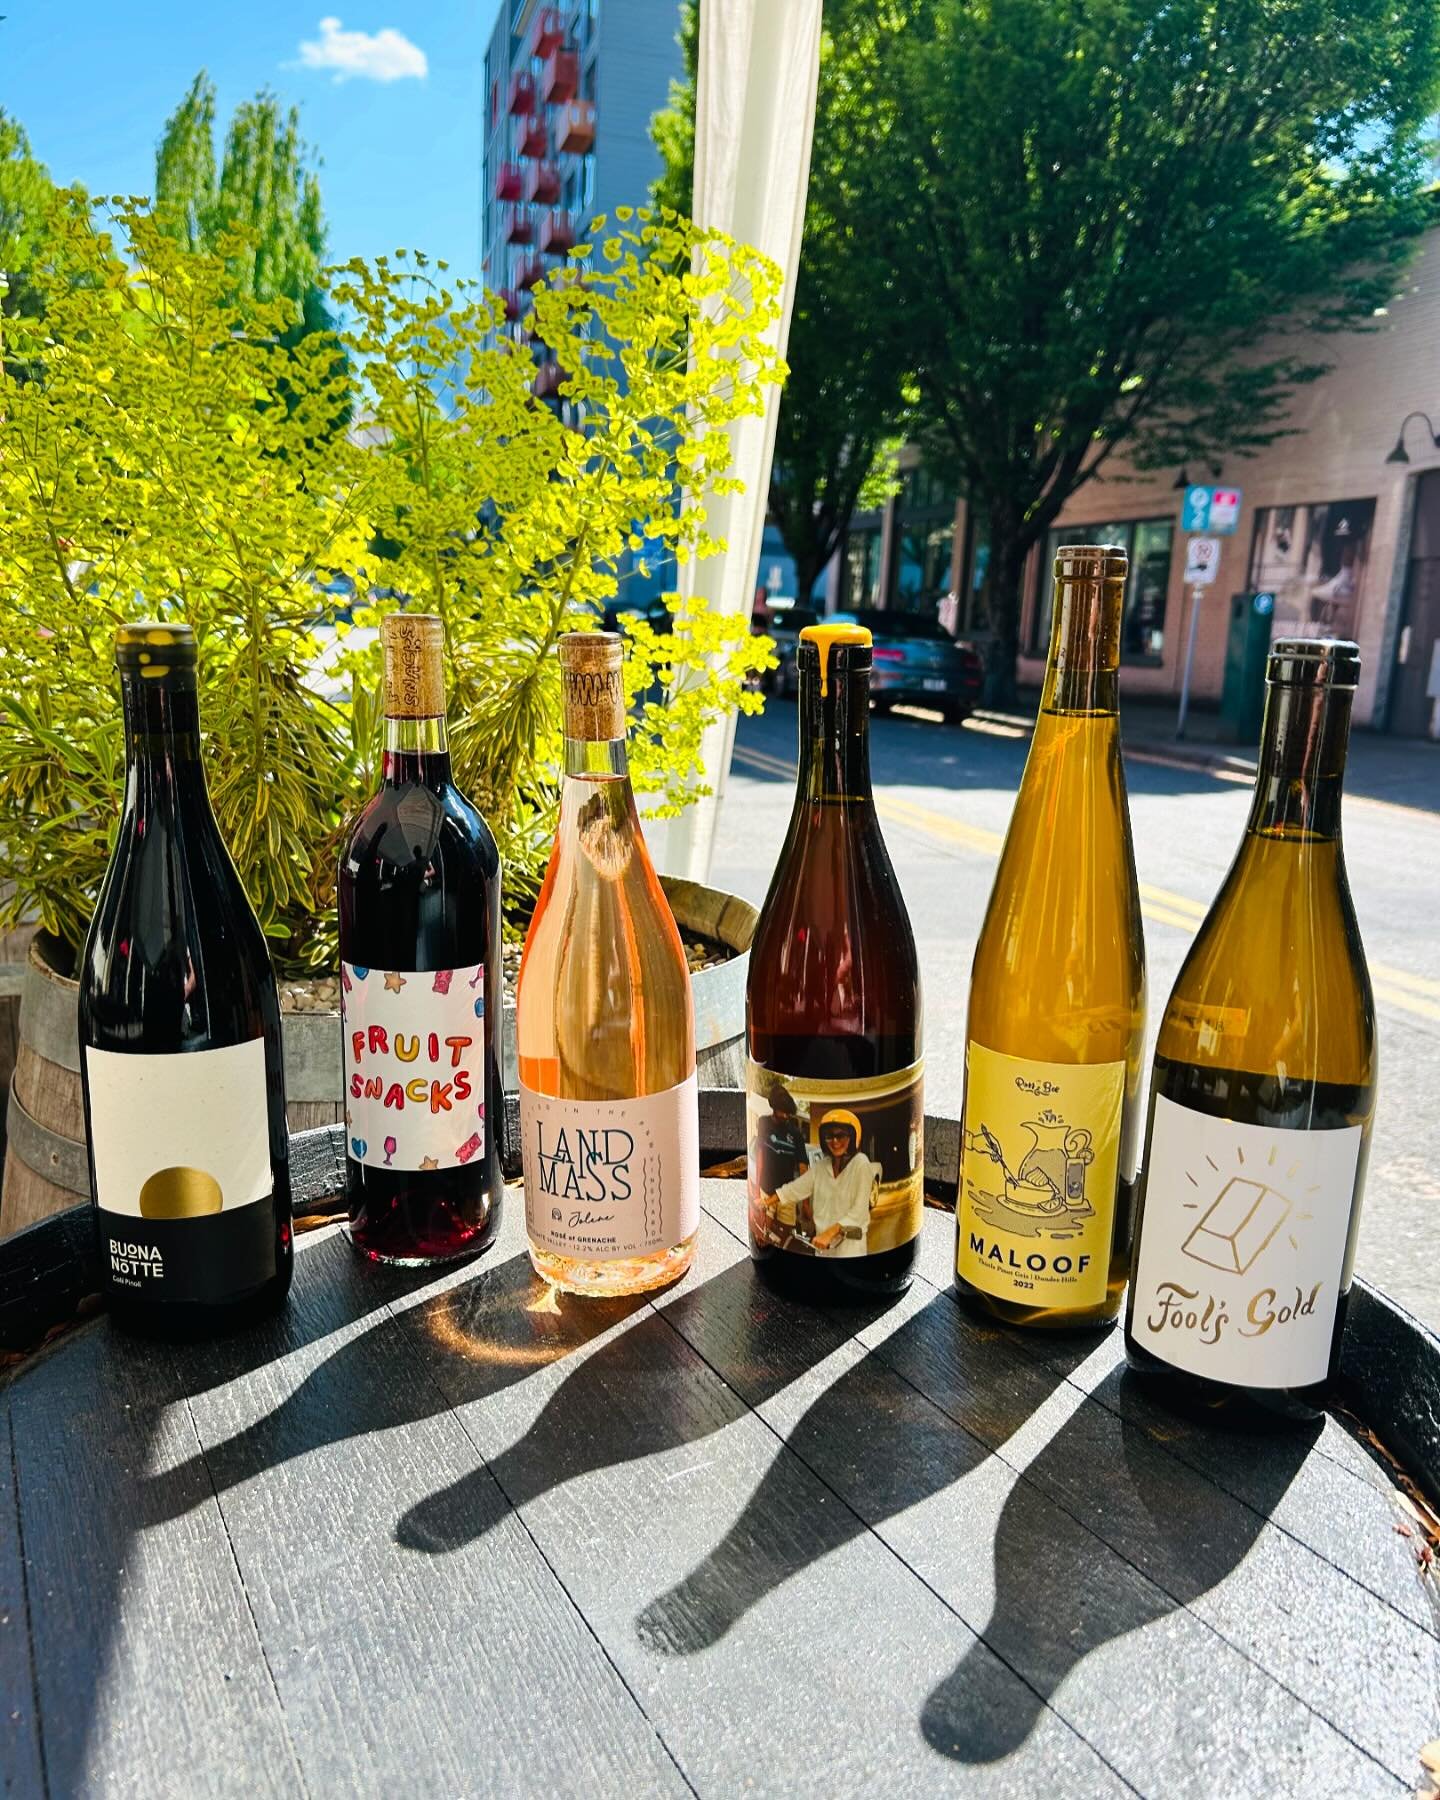 For those about to celebrate Oregon Wine Month, we salute you!  The caf&eacute; at Everett features a new list of six wines we love from local wineries that perfectly capture the uniqueness and energy of all that Oregon has to offer. Swing by for a s